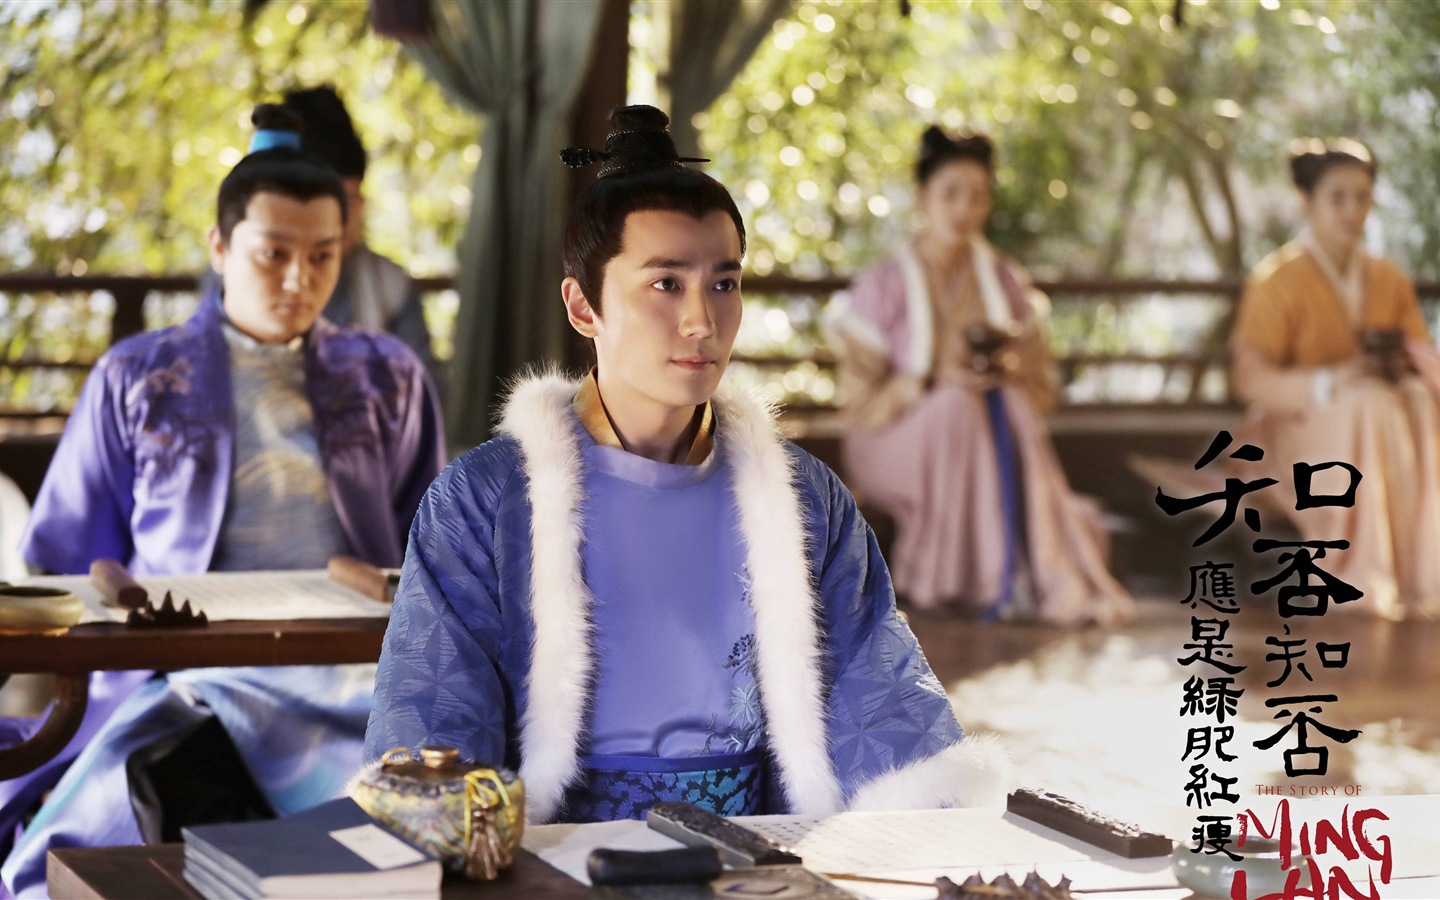 The Story Of MingLan, TV series HD wallpapers #52 - 1440x900